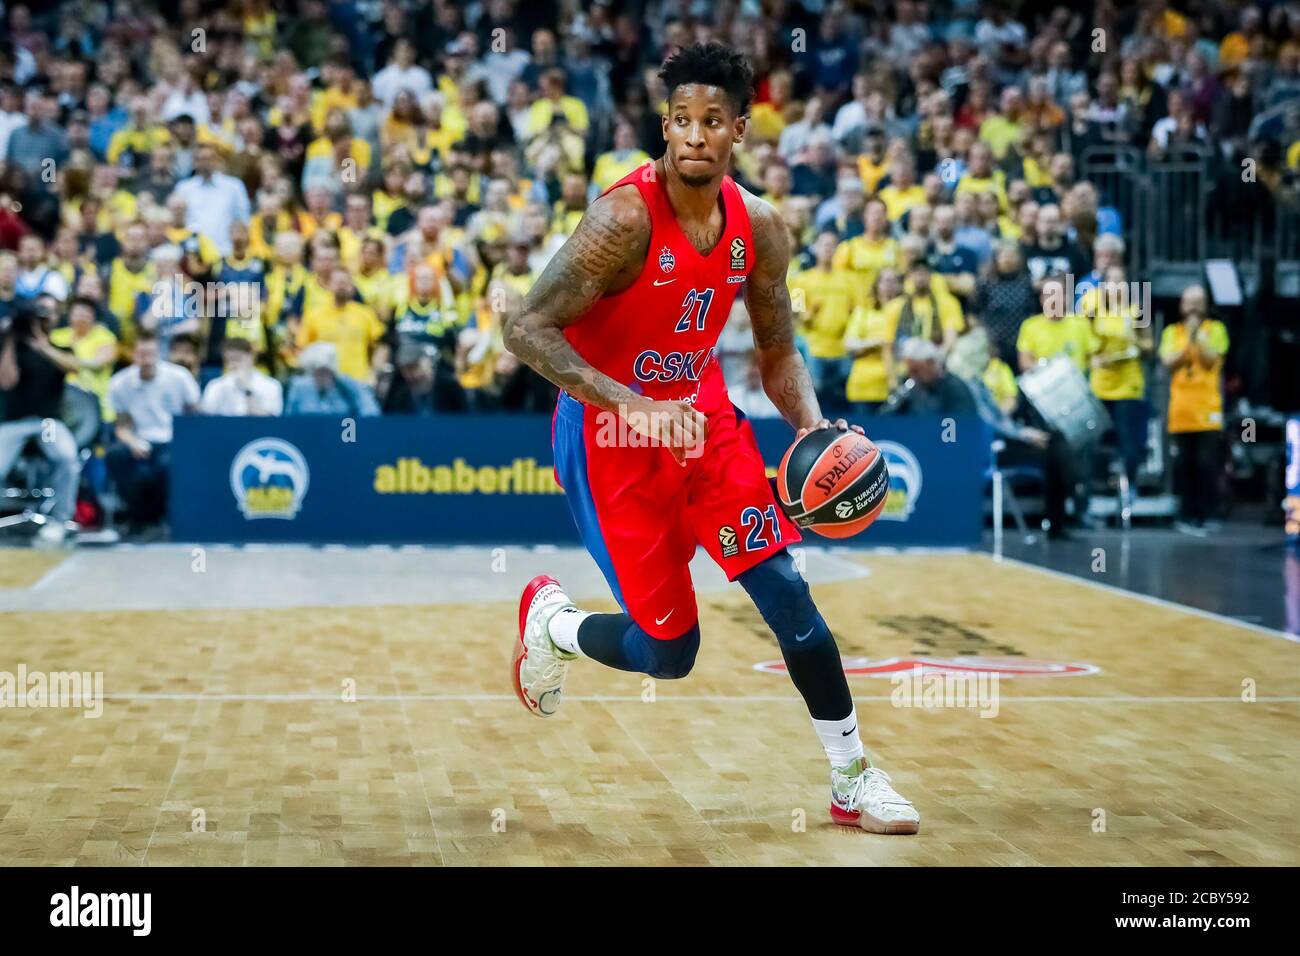 Berlin, Germany, October 25, 2019: Will Clyburn of CSKA Moscow in action during the EuroLeague basketball match between Alba Berlin and CSKA Moscow Stock Photo